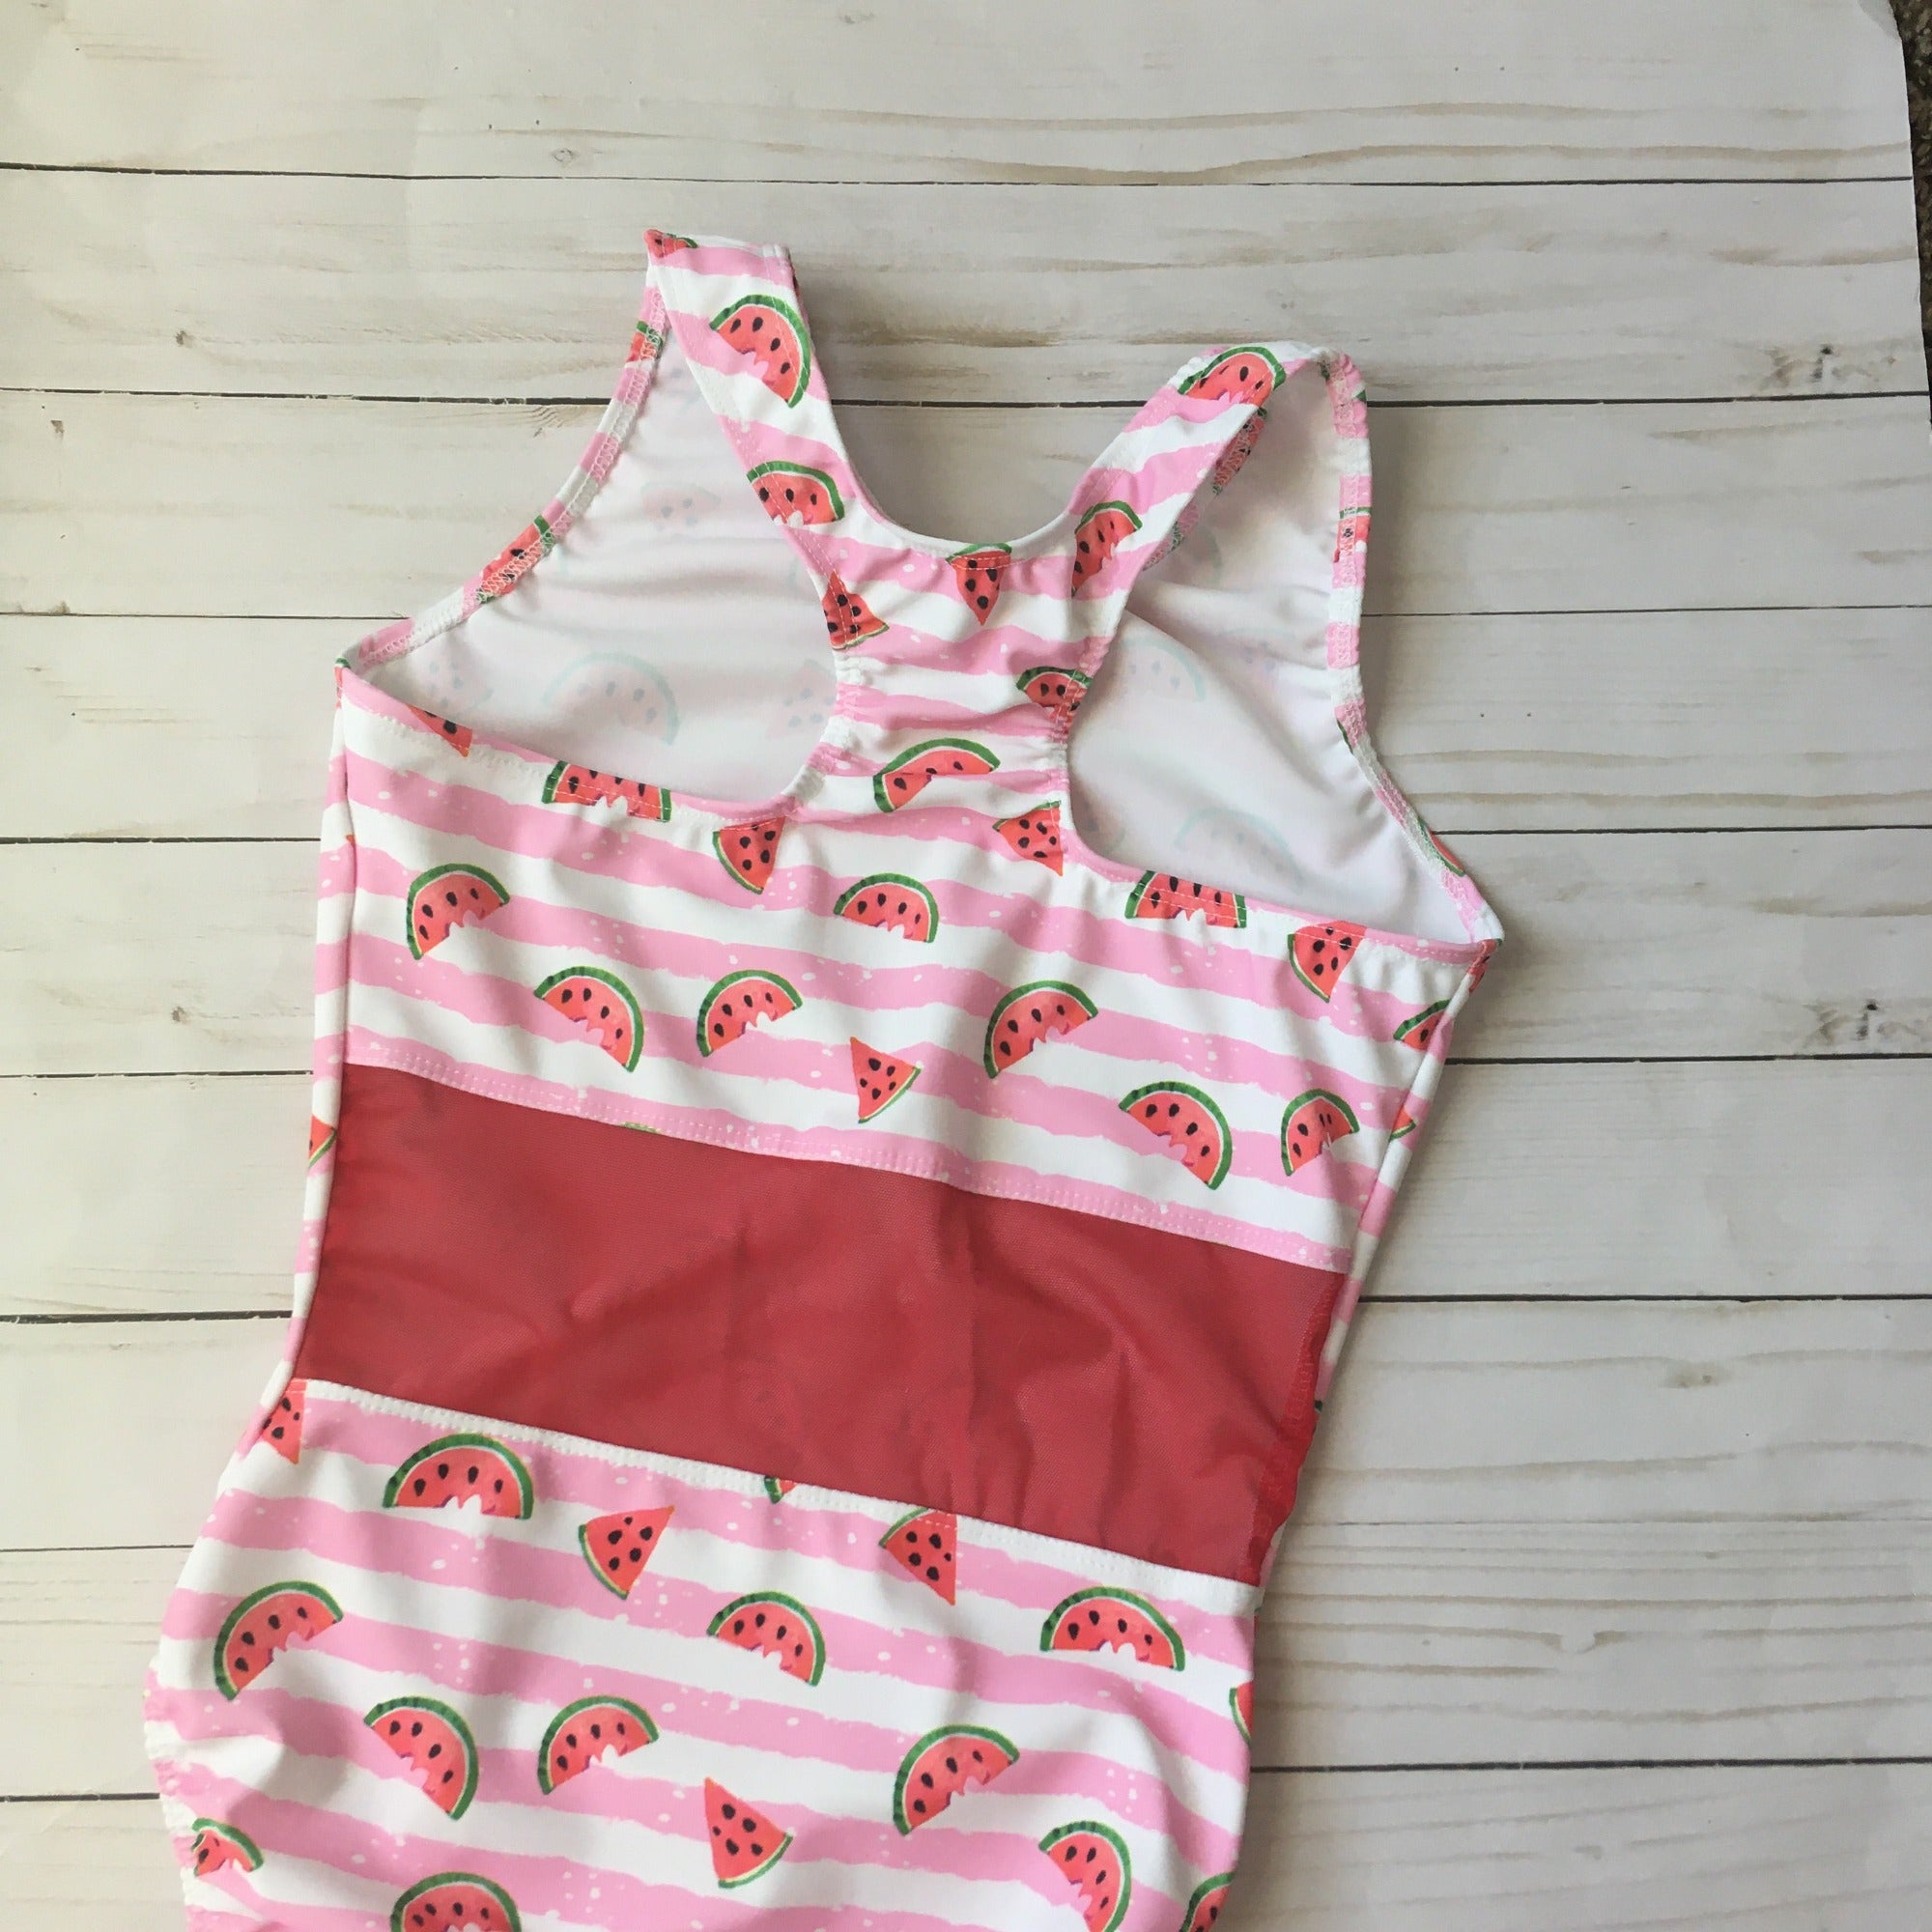 Racerback leotard with red mesh in middle of back